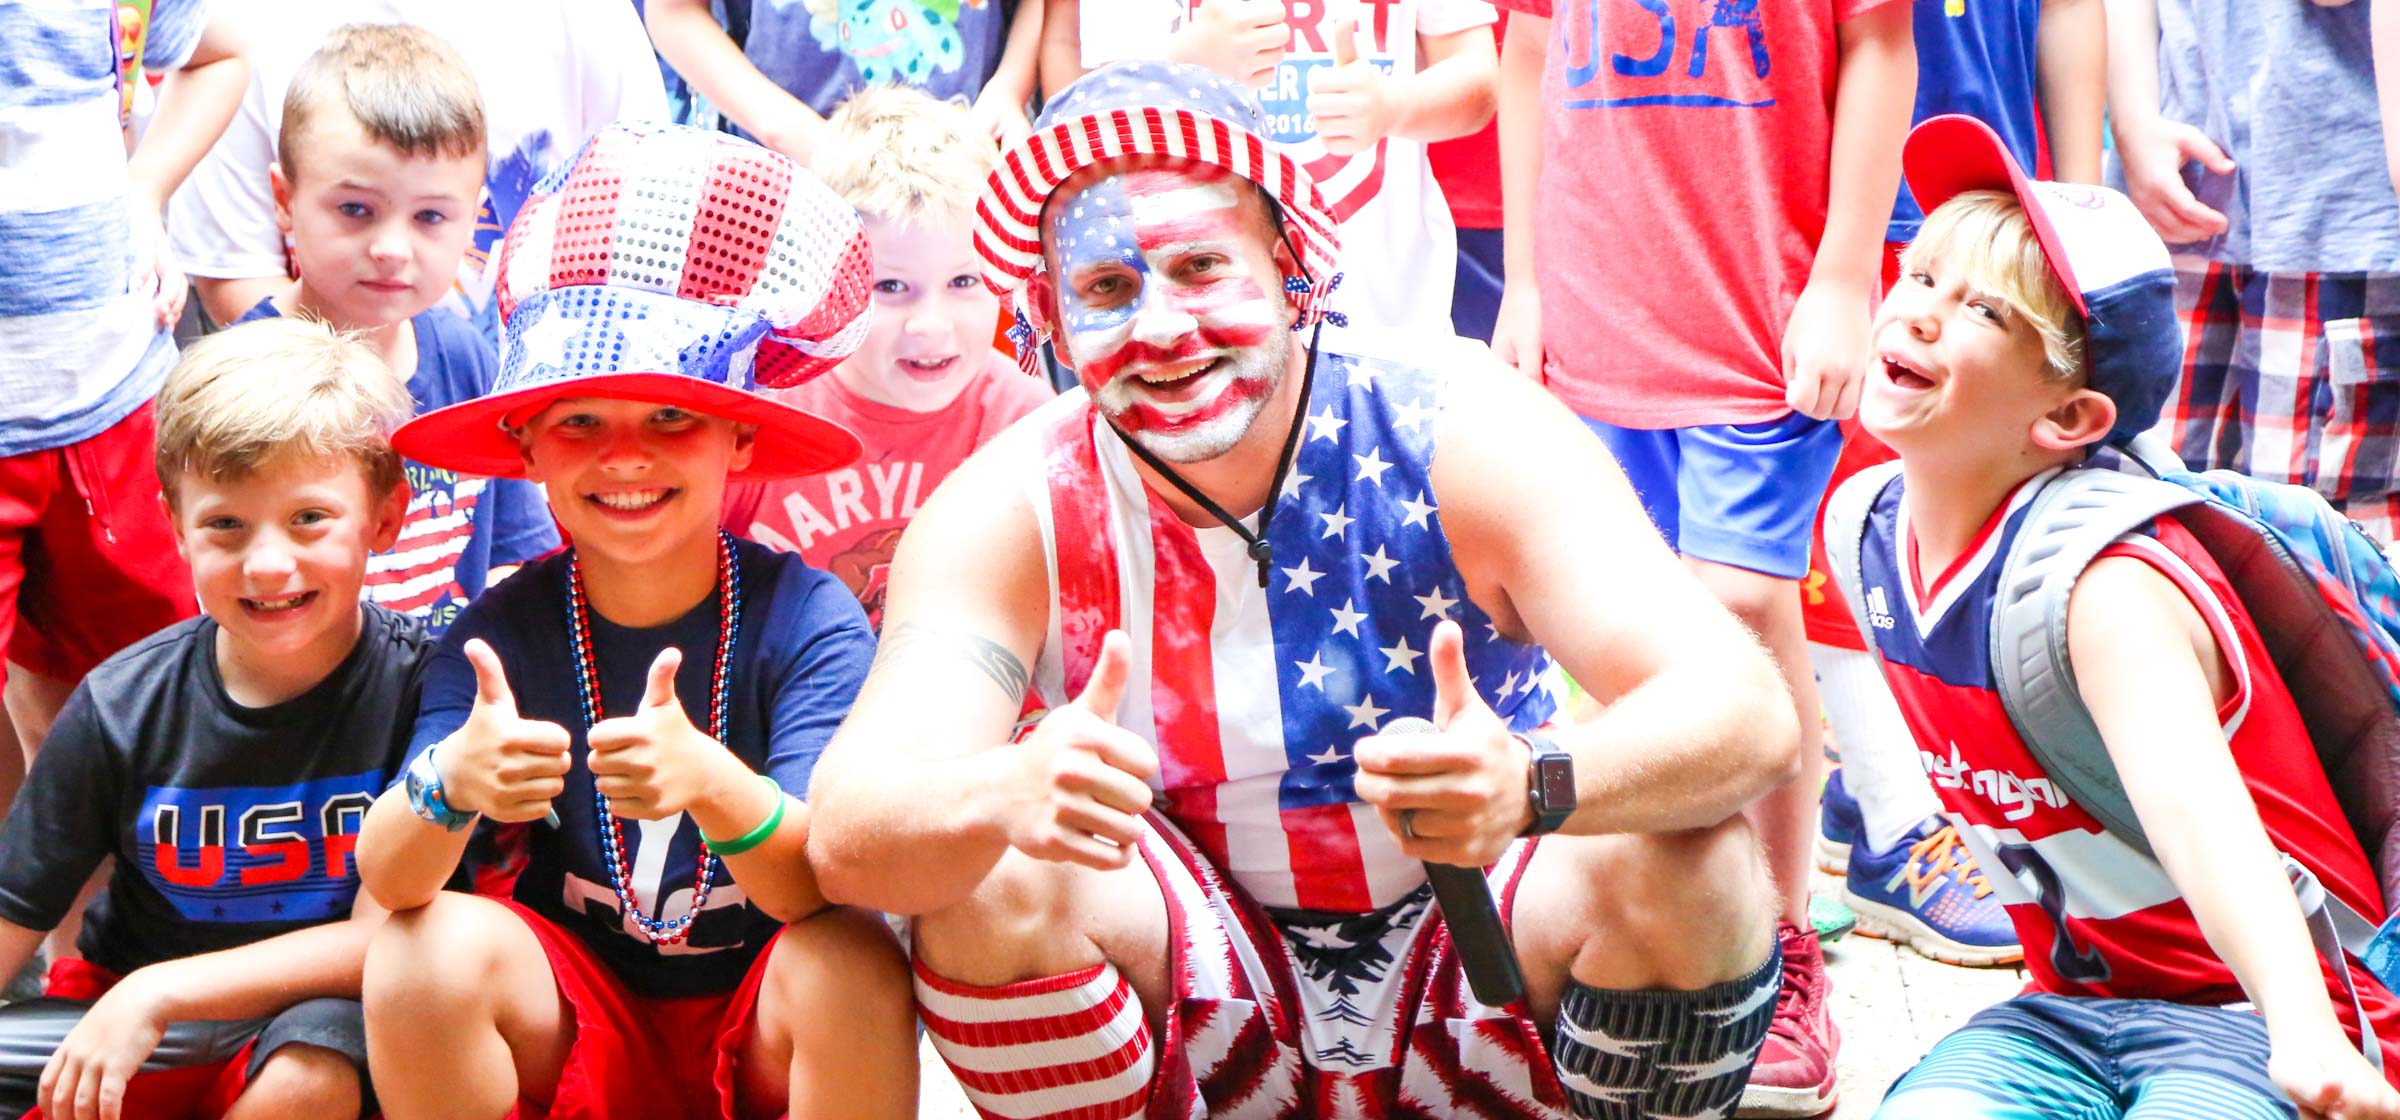 Counselor sitting amongst campers all with fourth of July face paint and outfits on